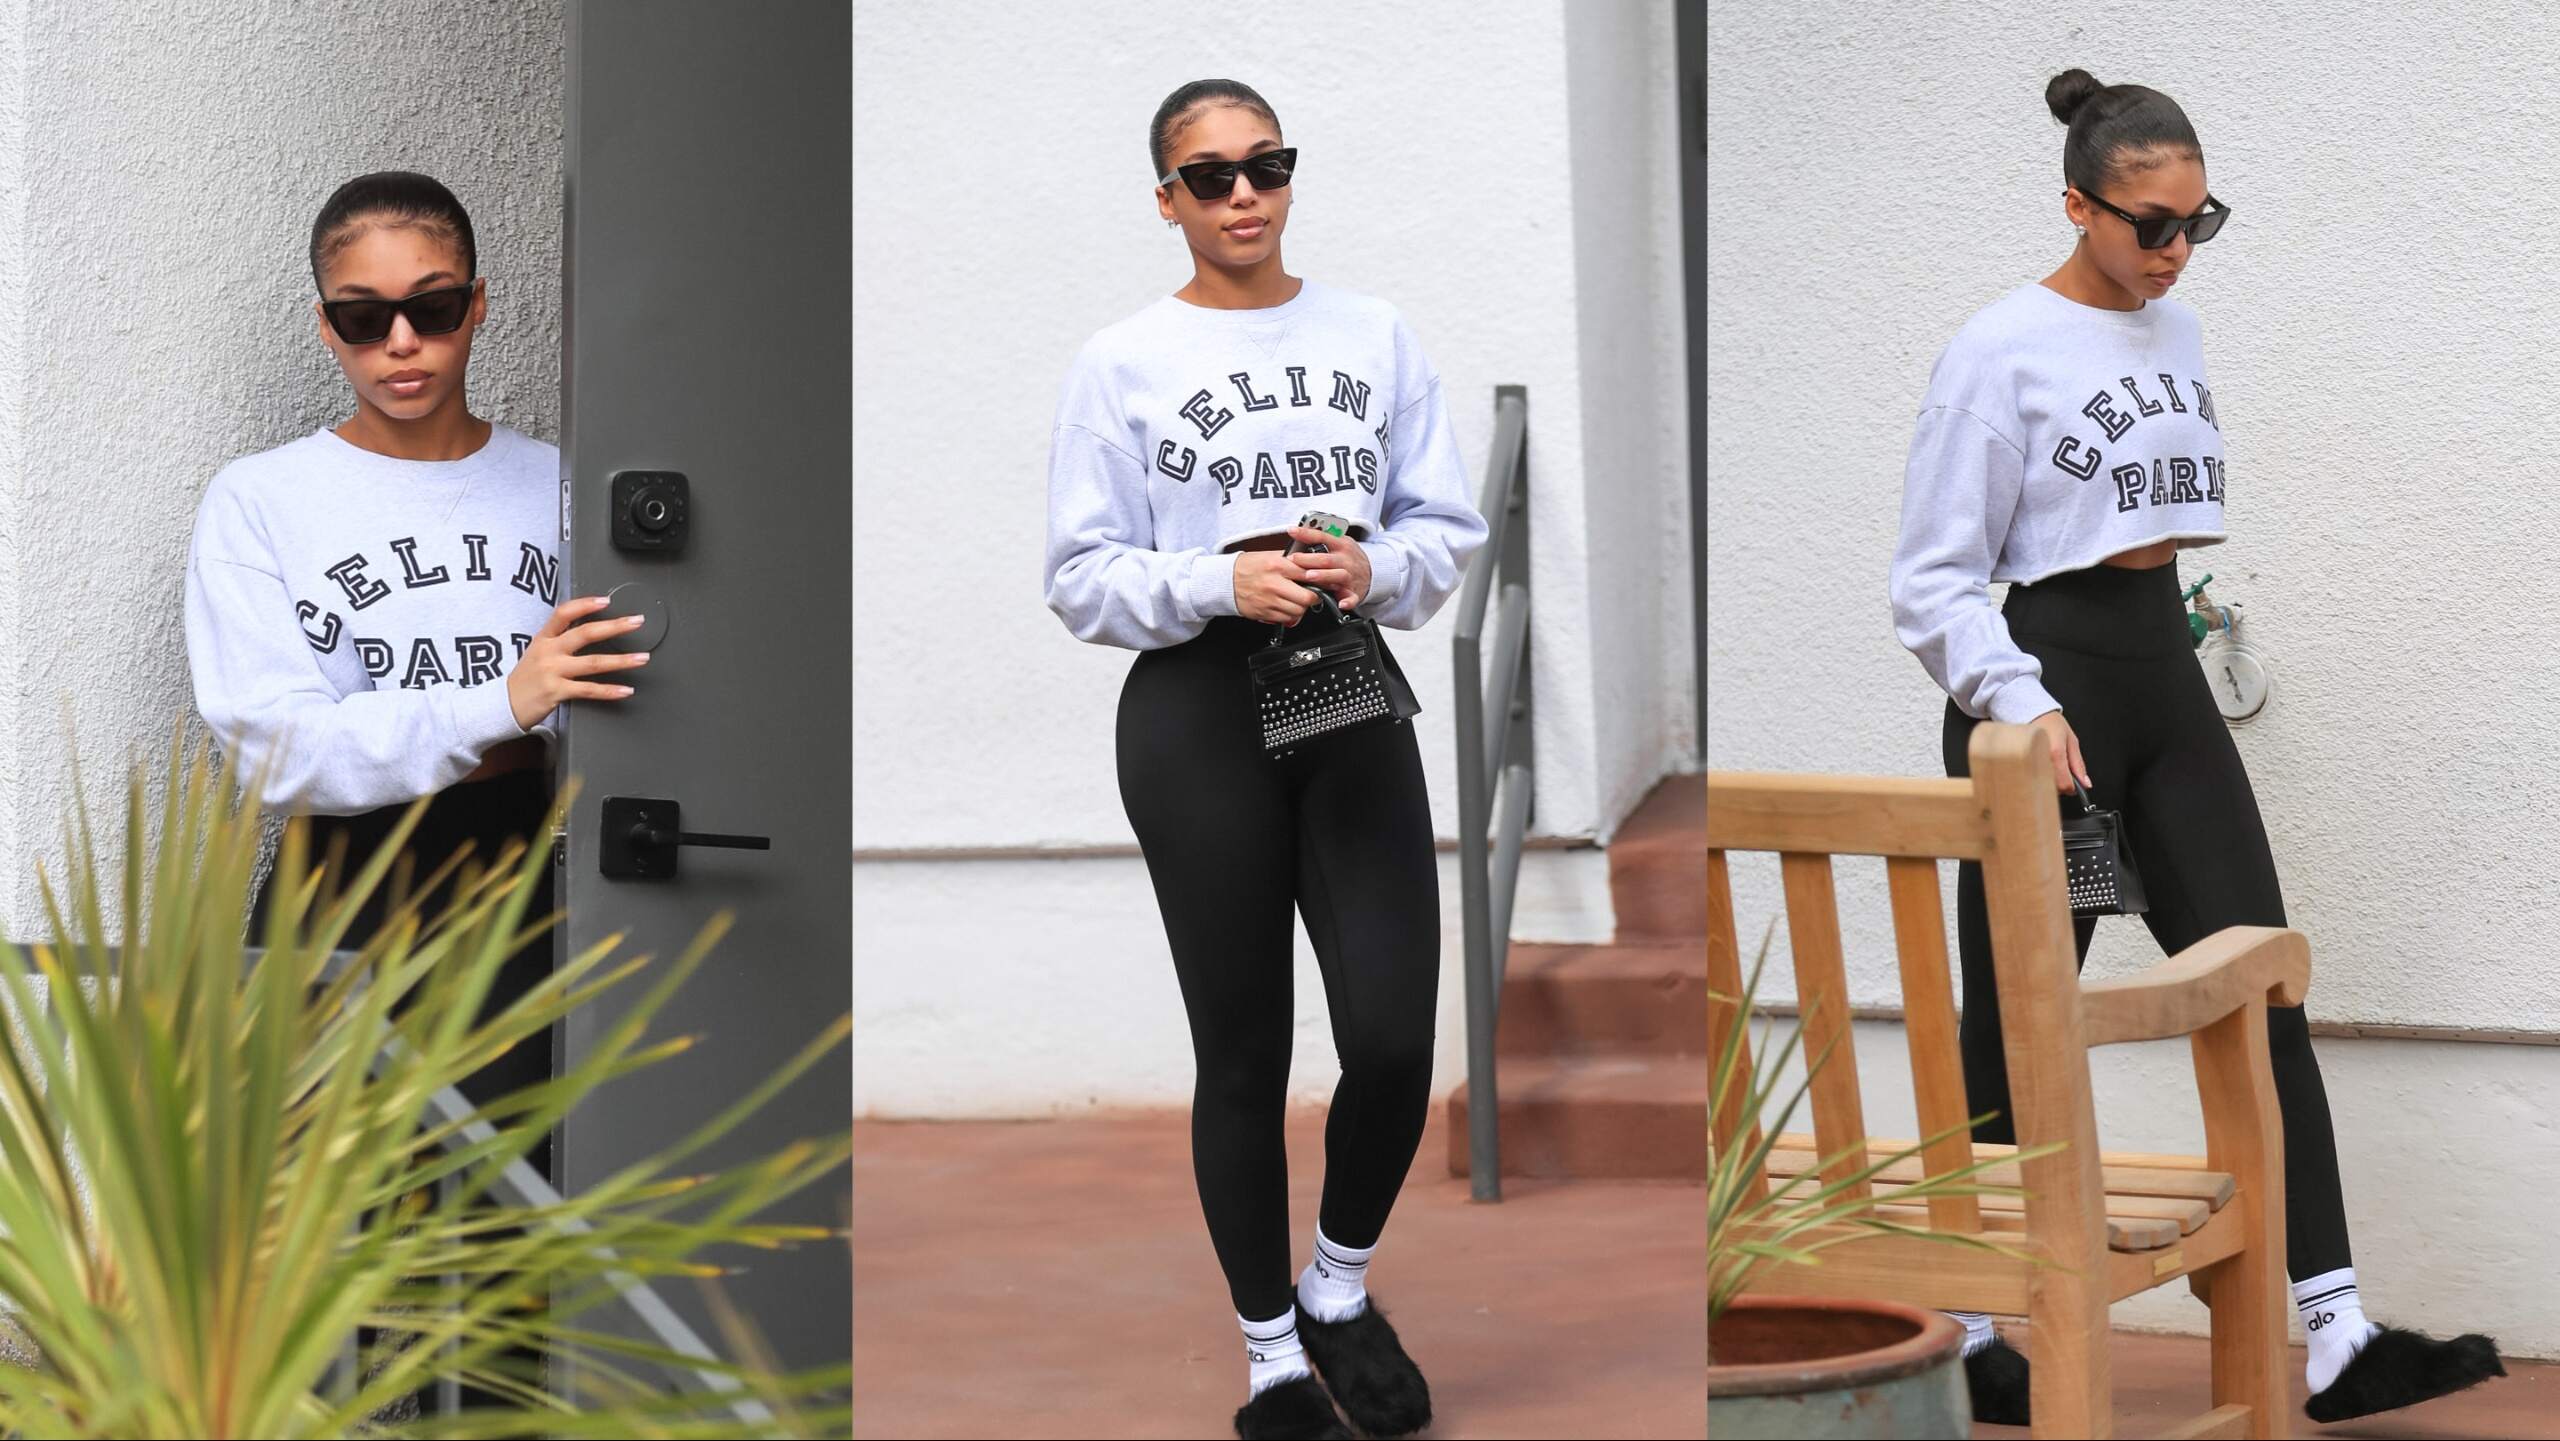 Model Lori Harvey walks out of her workout class in black leggings and a gray cut-off sweatshirt